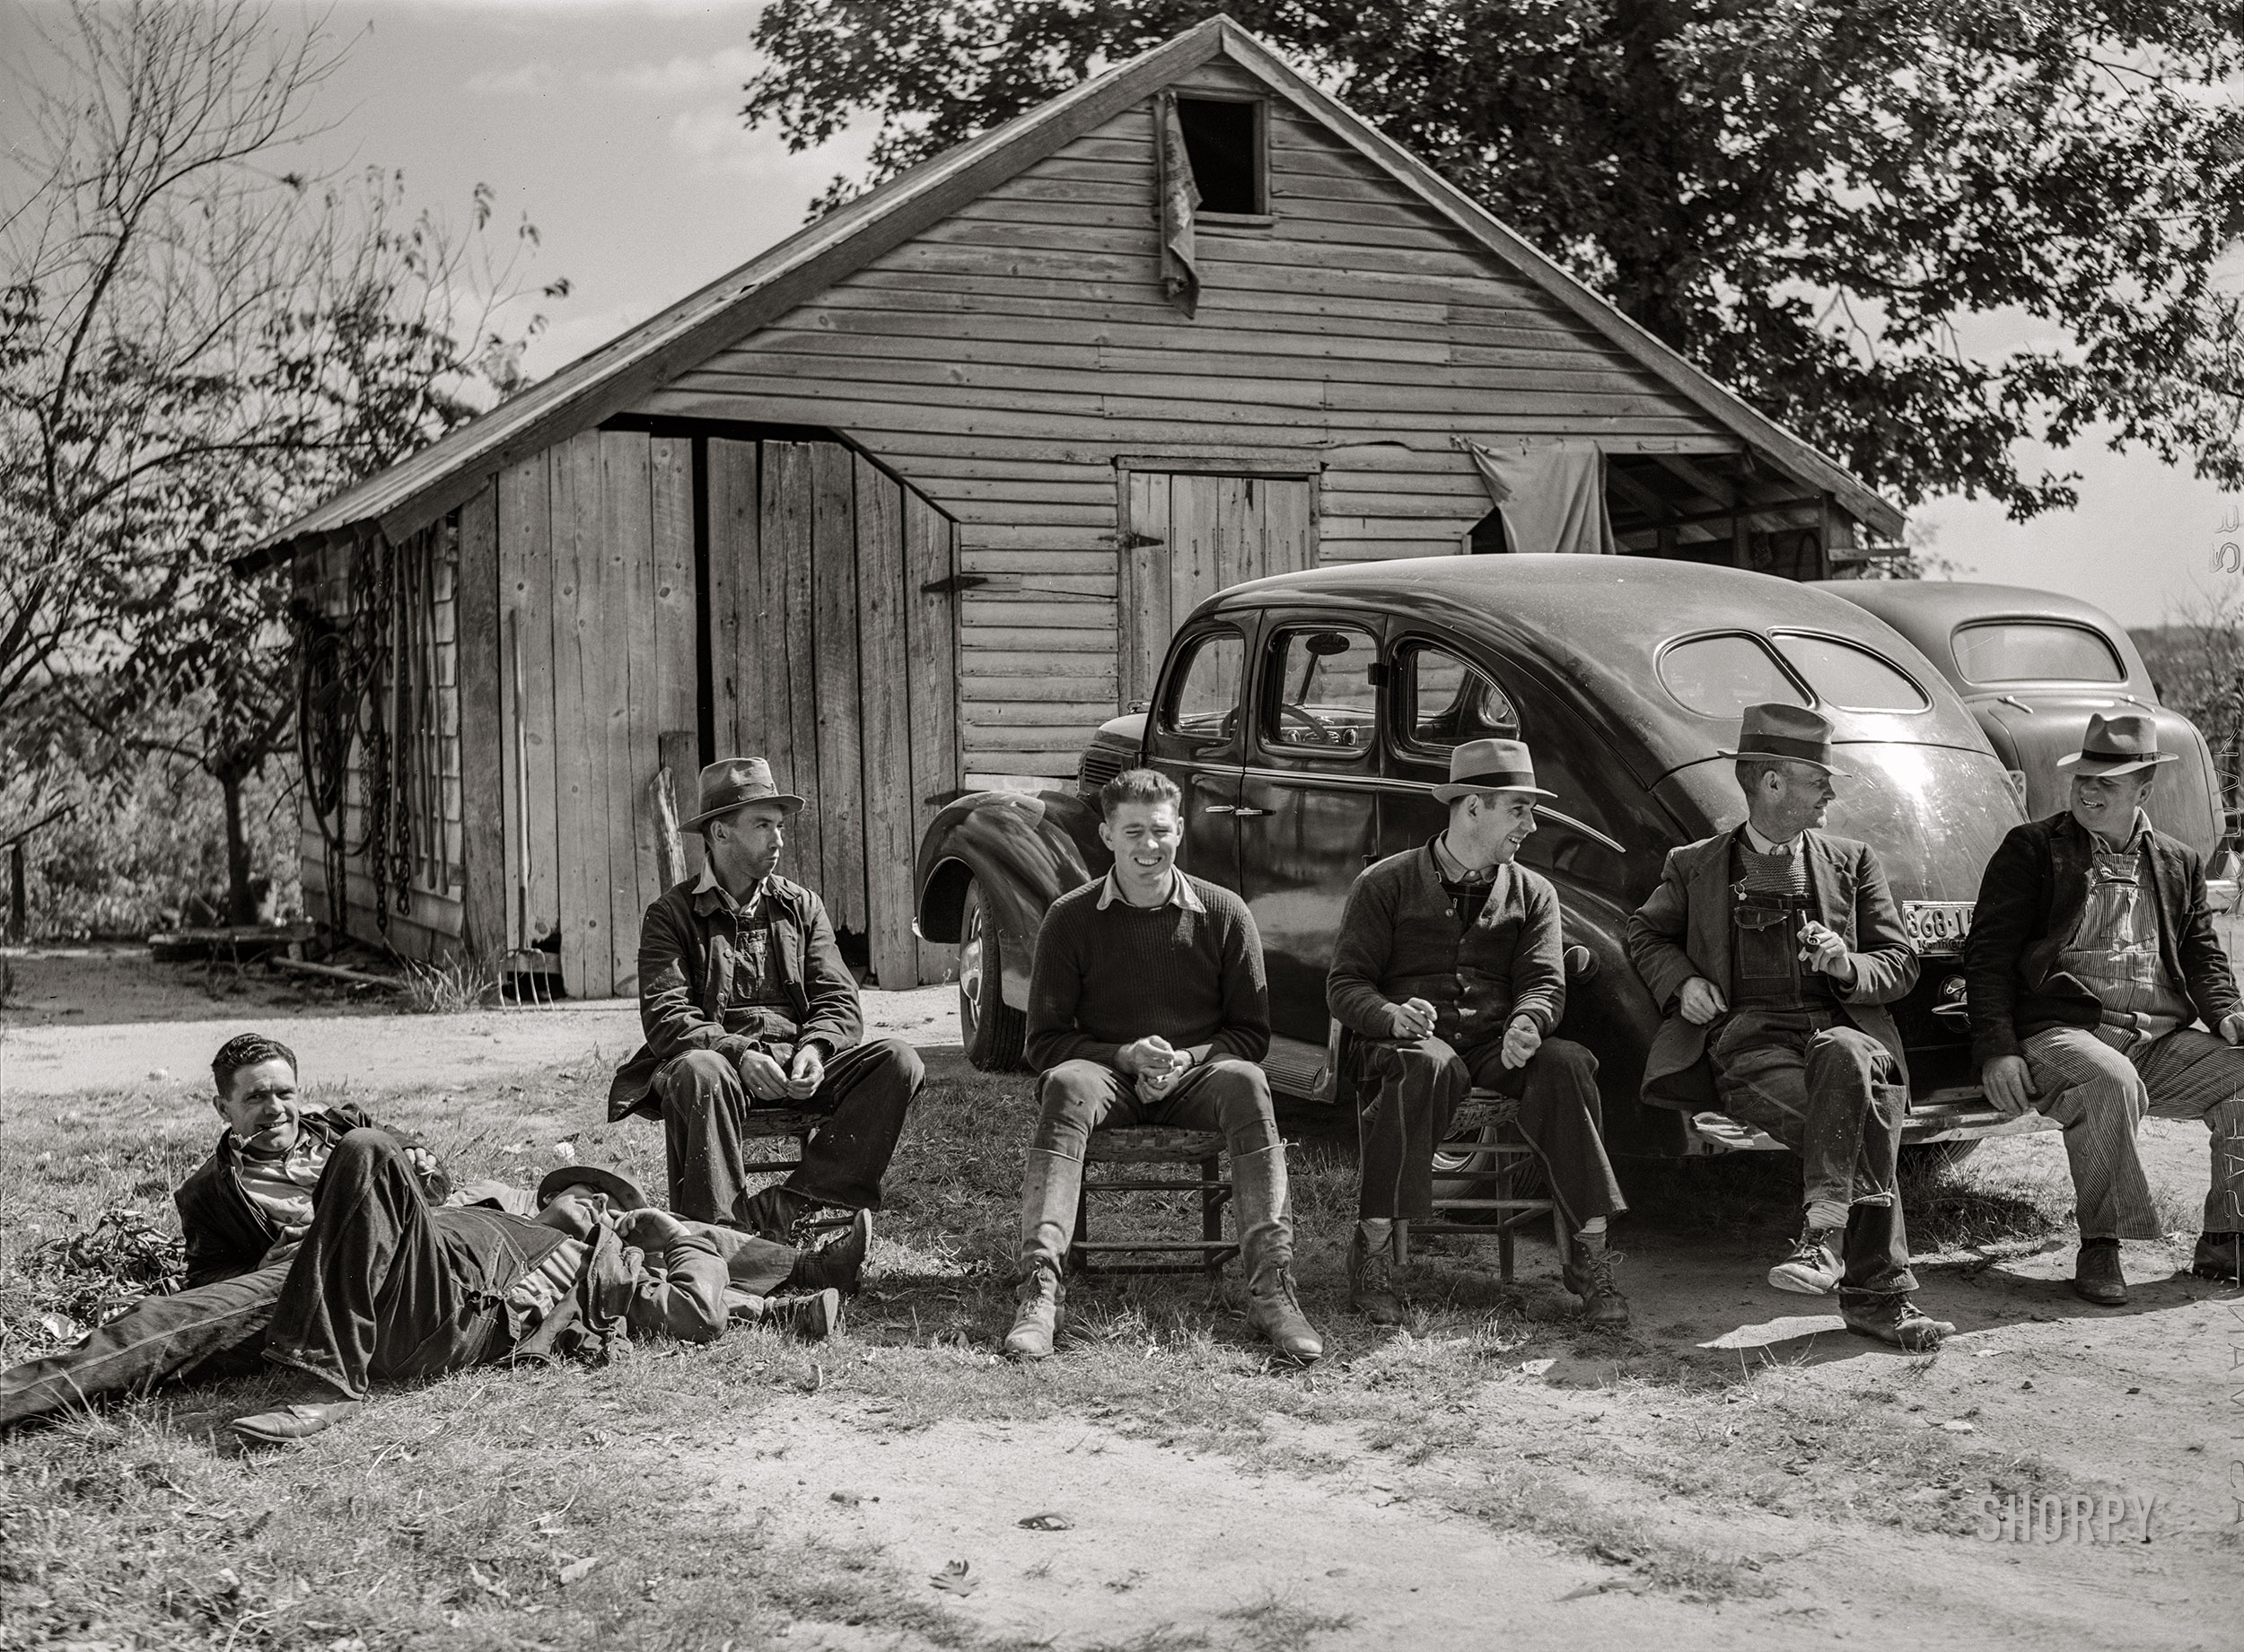 October 1940. "Resting after dinner following a corn shucking on Hooper Farm in Corbett Ridge section. Caswell County, North Carolina." Medium format acetate negative by Marion Post Wolcott for the Farm Security Administration. View full size.